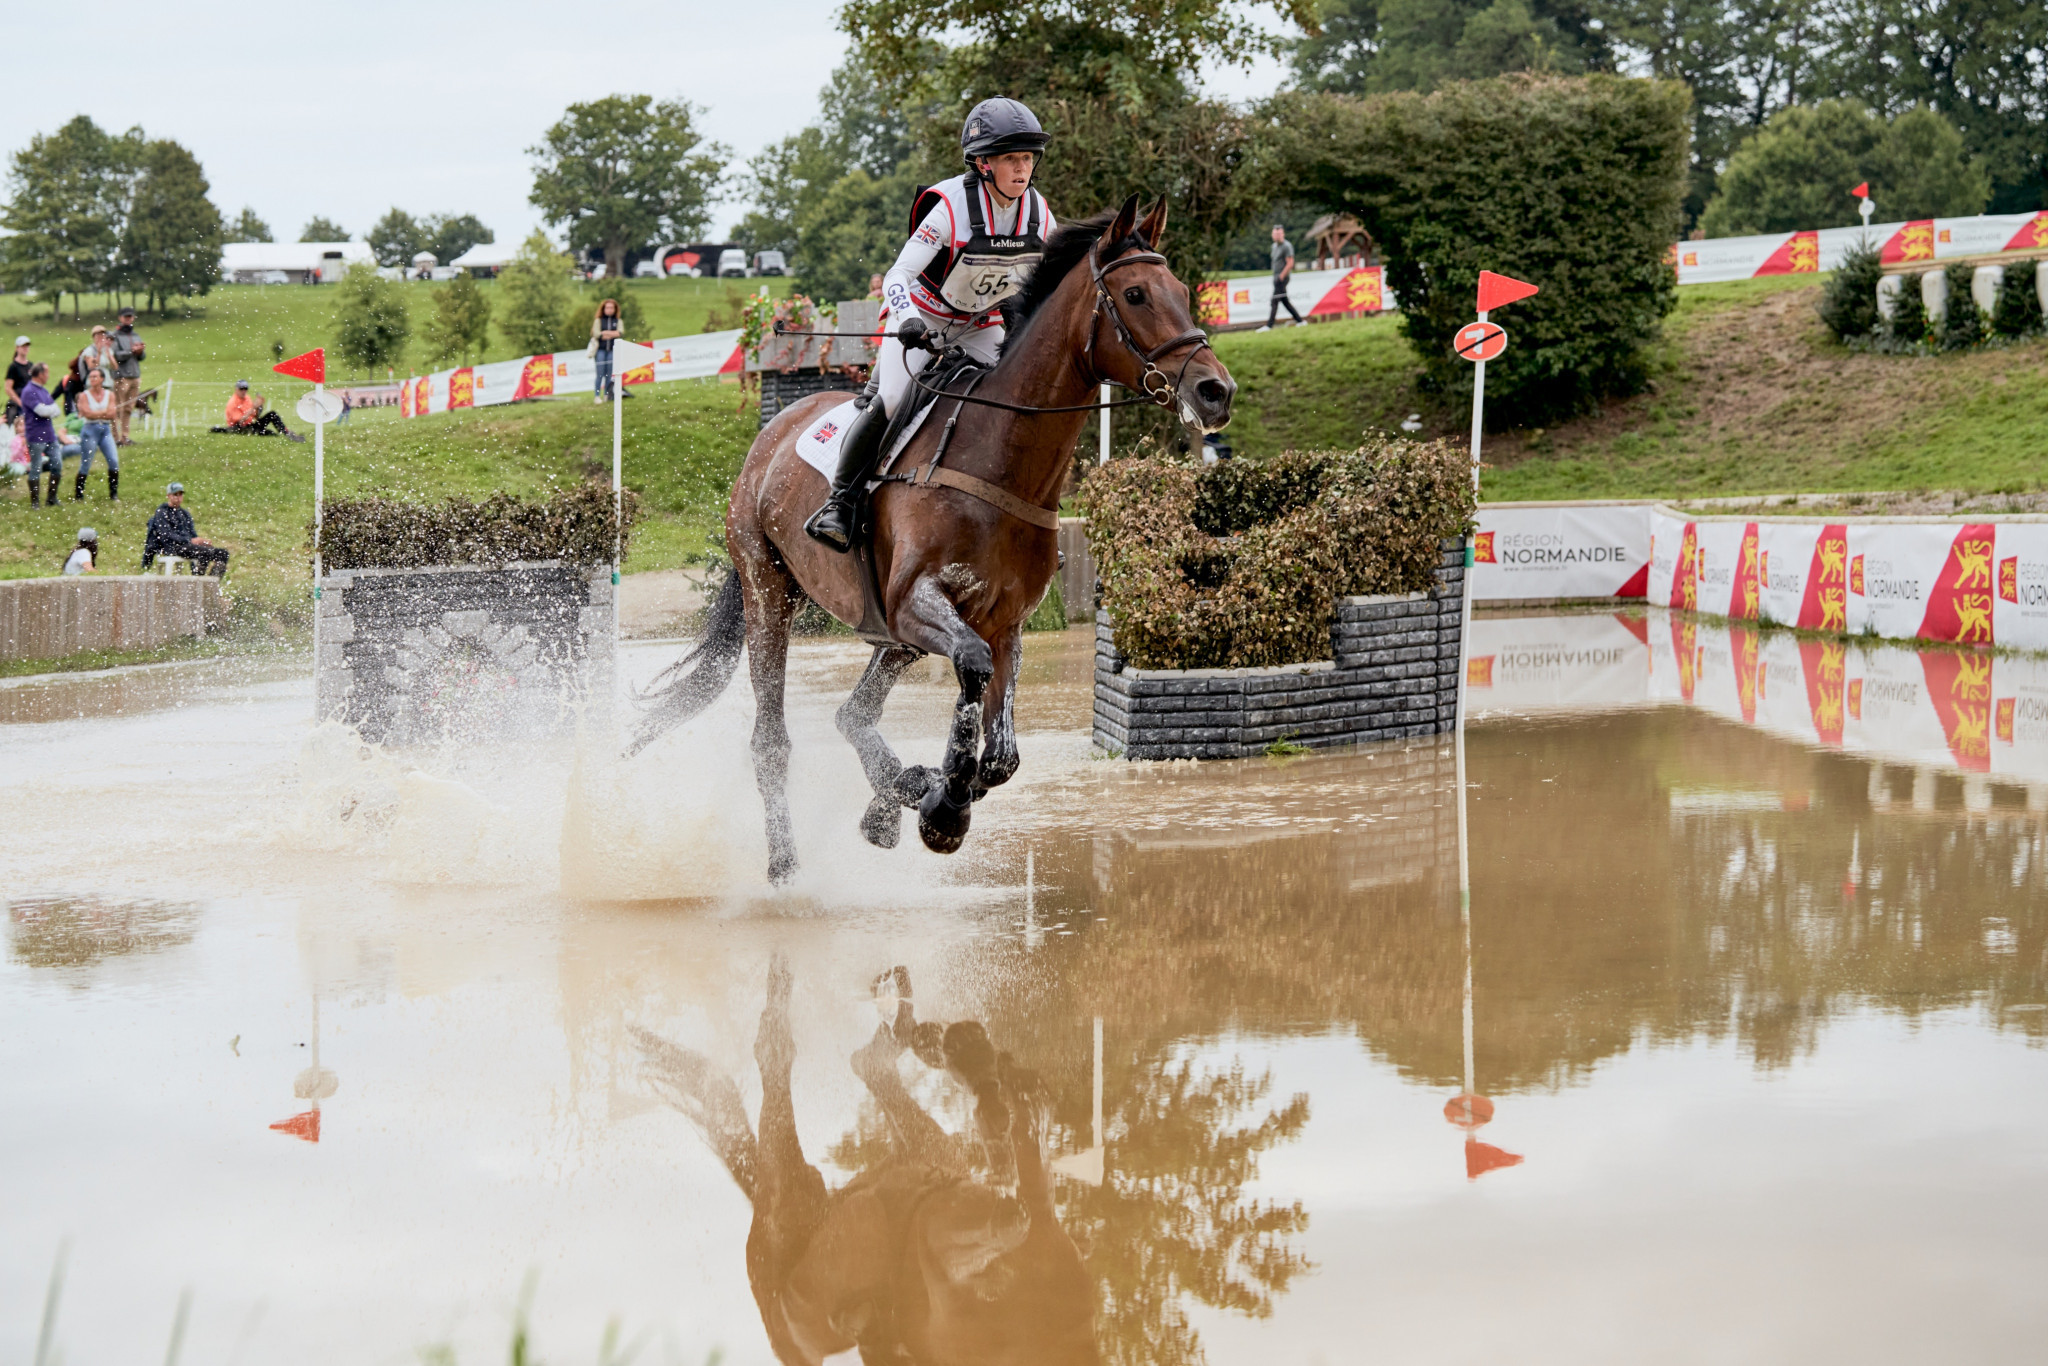 Canter leads Britain at Eventing European Championships with double gold